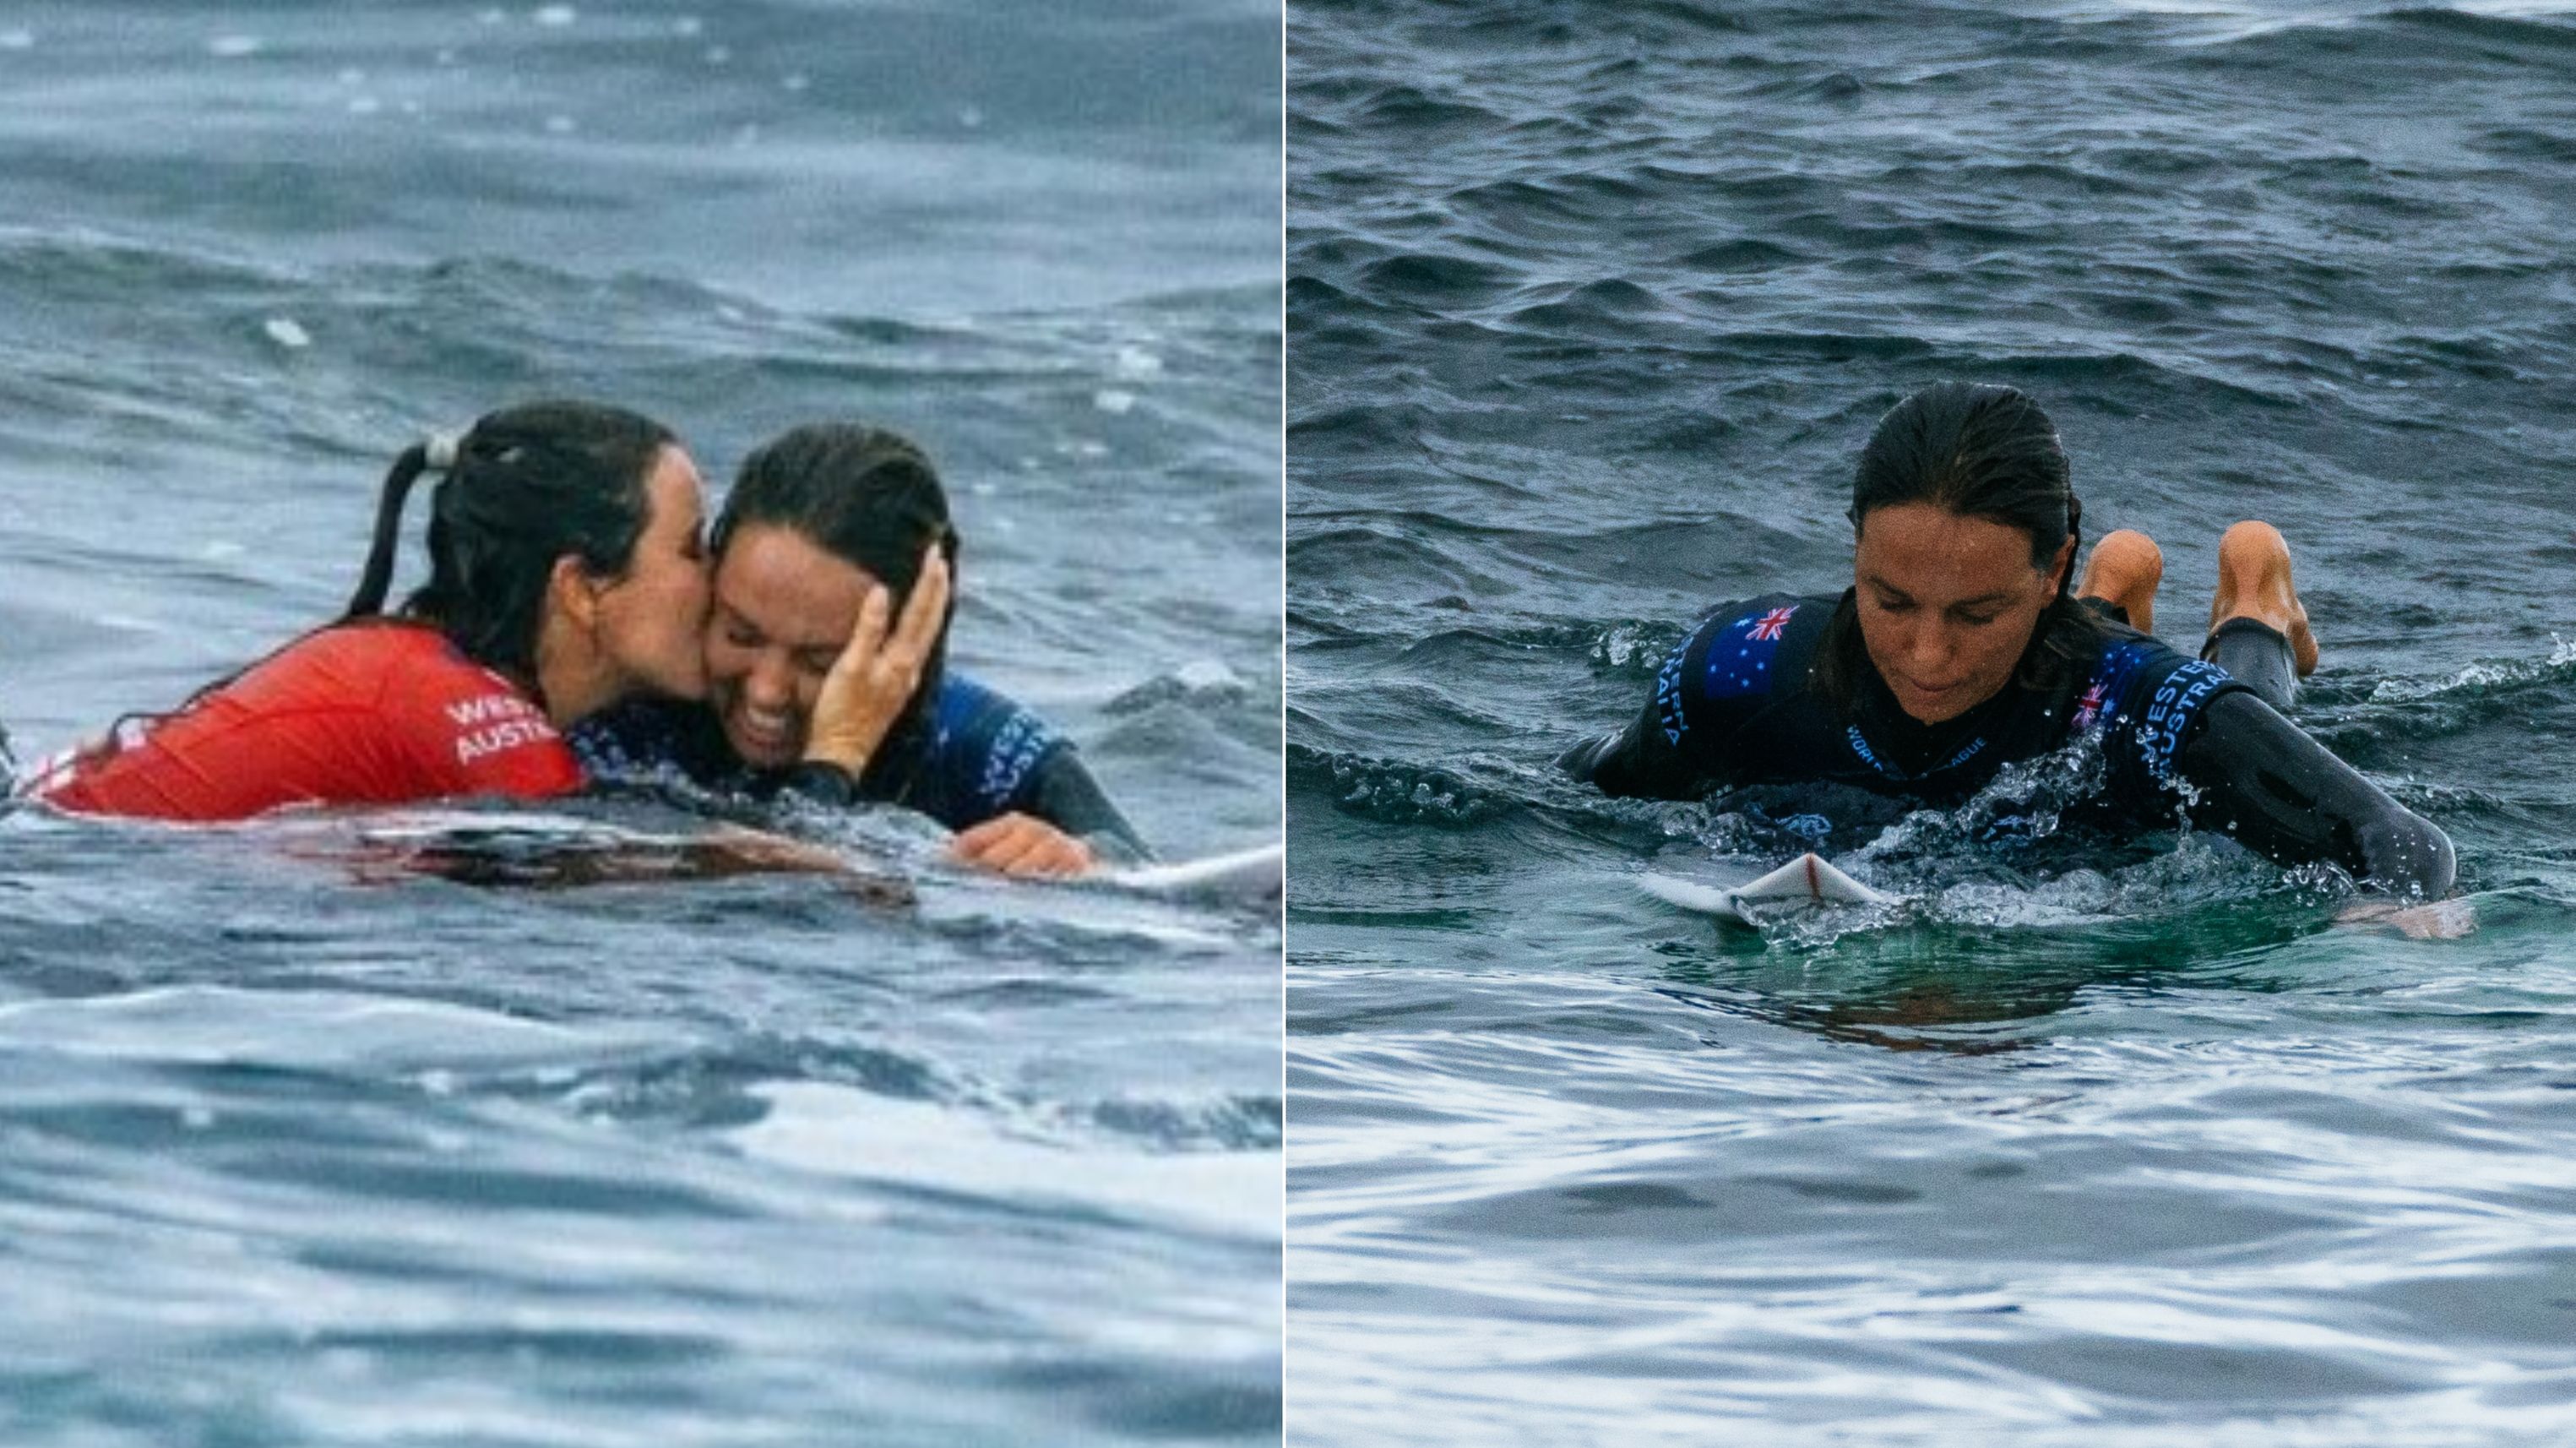 Aussie surfing star Sally Fitzgibbons is consoled by Johanne Defay after being knocked off the World Surf League tour.